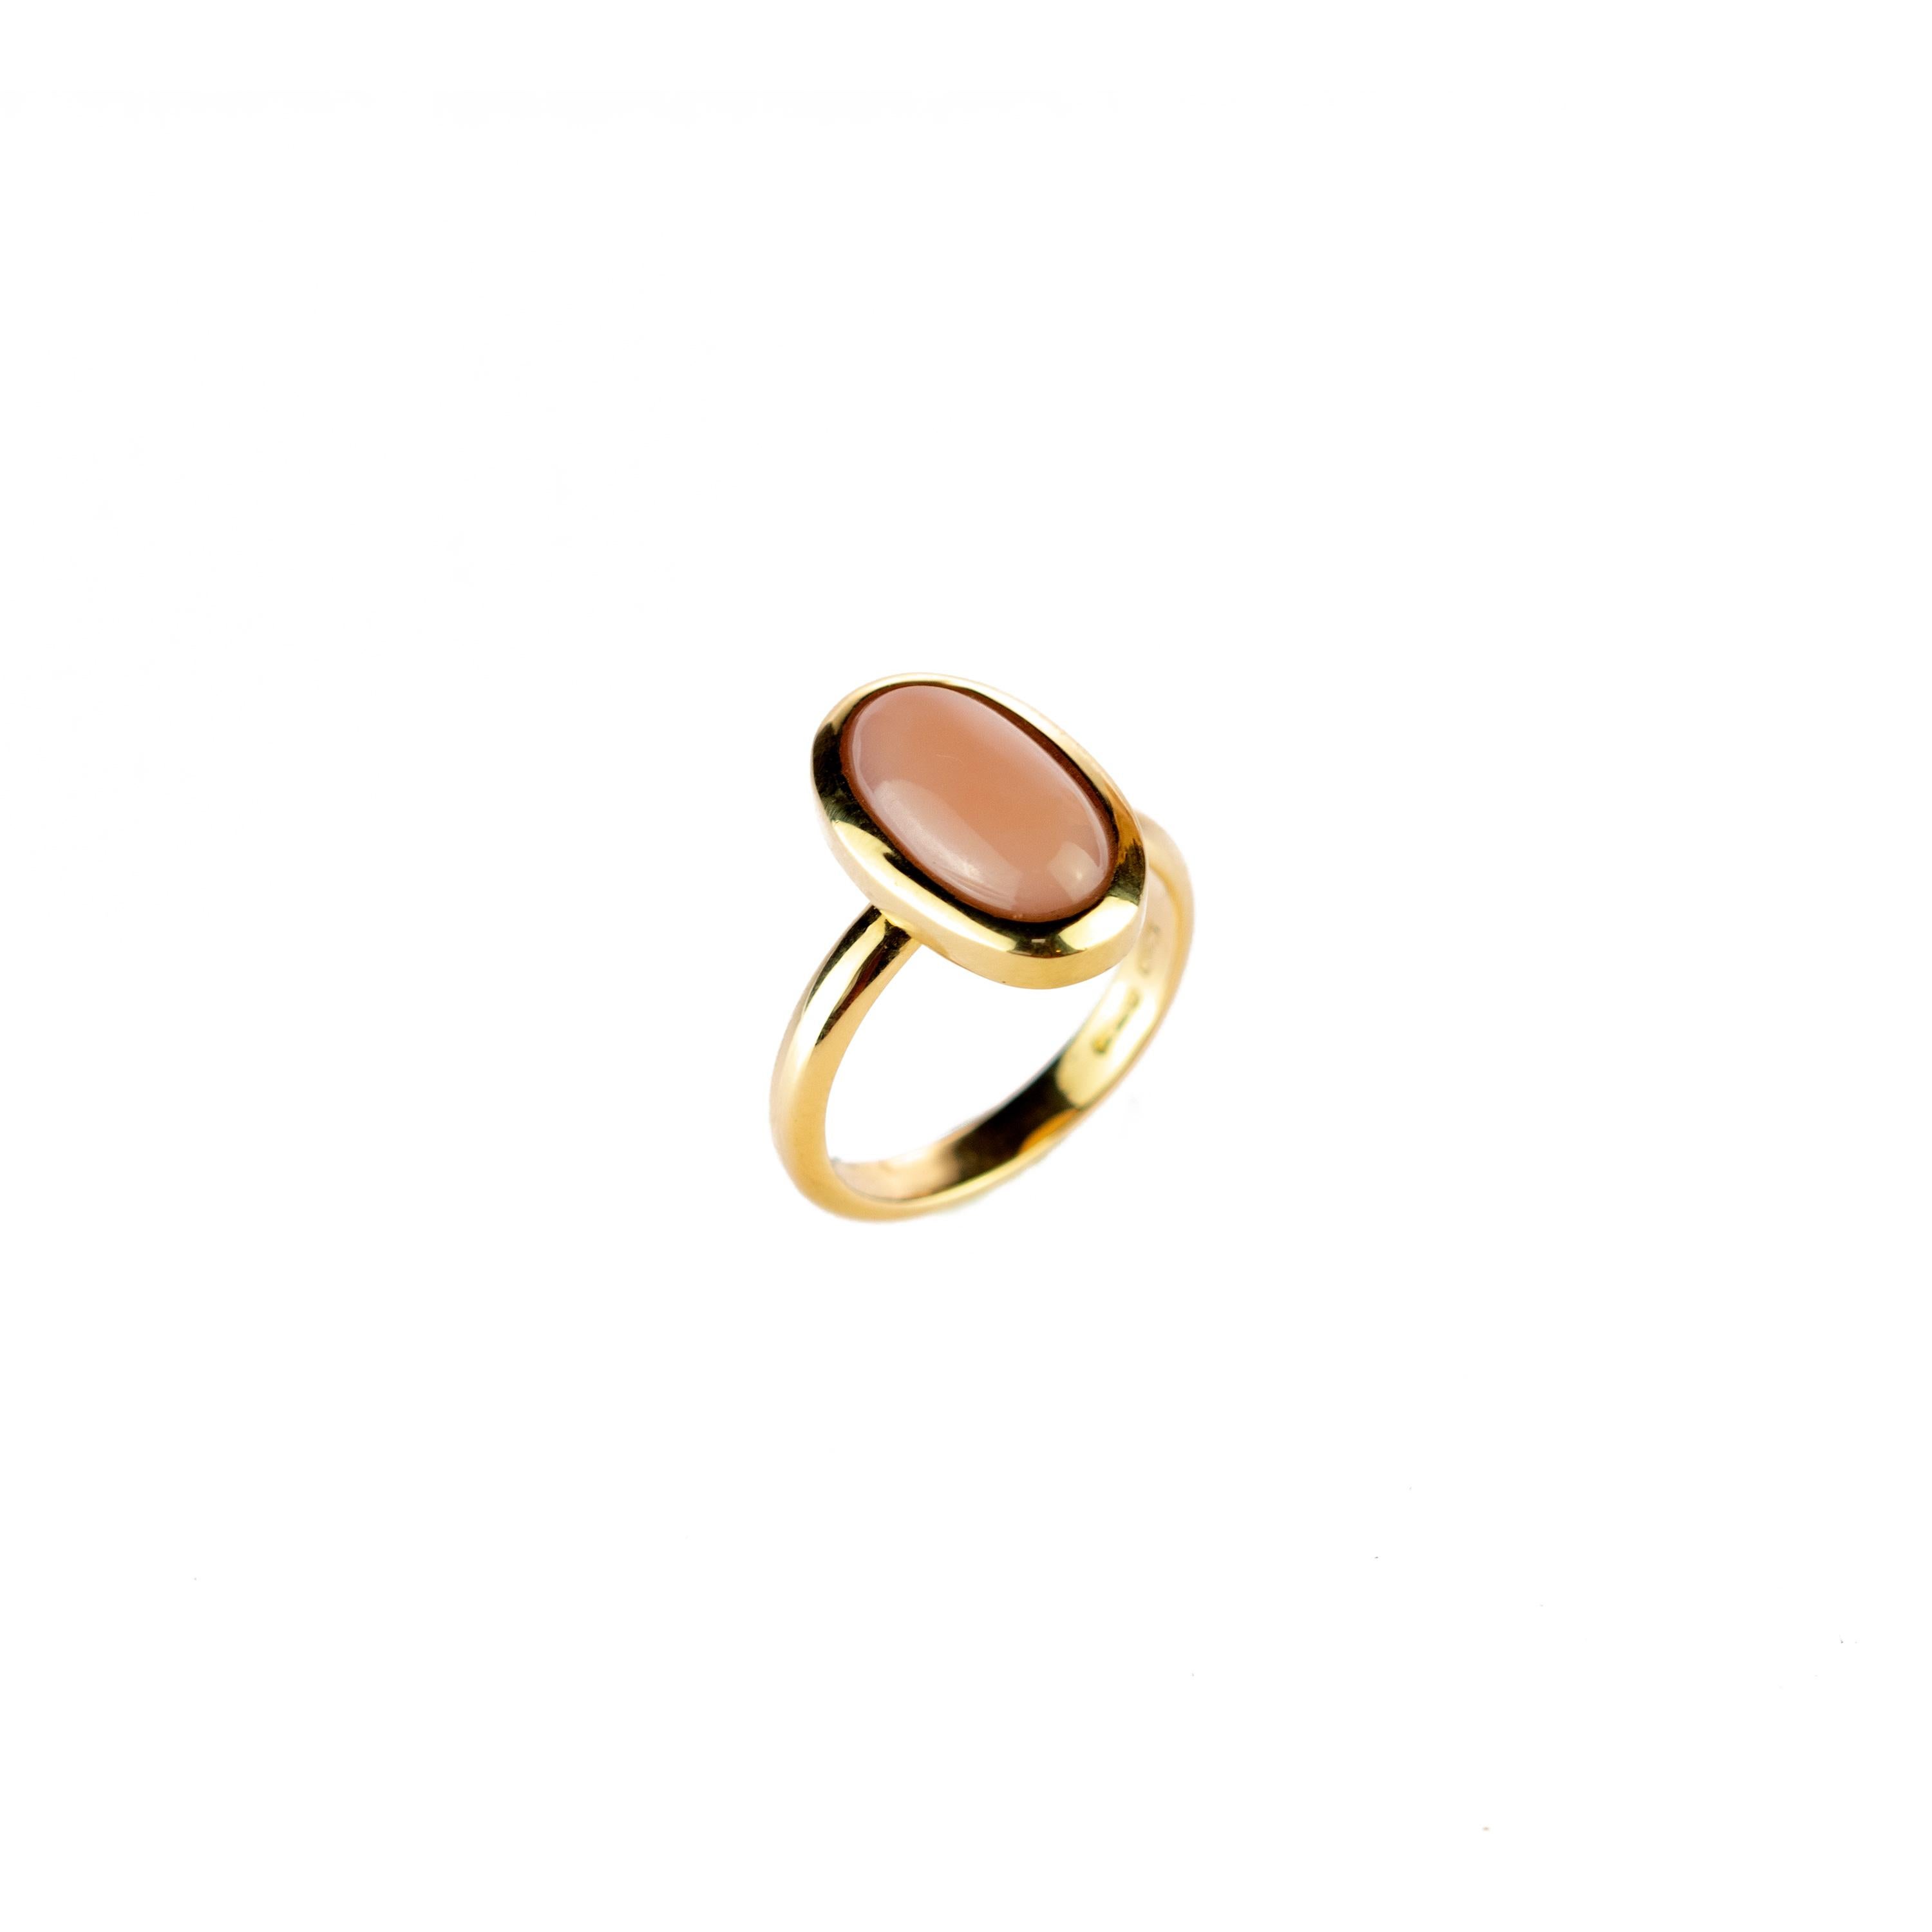  Delicate and stunning pink 5 carat natural coral ring. An oval cabochon surrounded by a 18 karat yellow gold circle. Crafted by our italian jewelers to magnify any feminine look. 
 
This ring is inspired by the Japanese cherry blossom, or sakura,